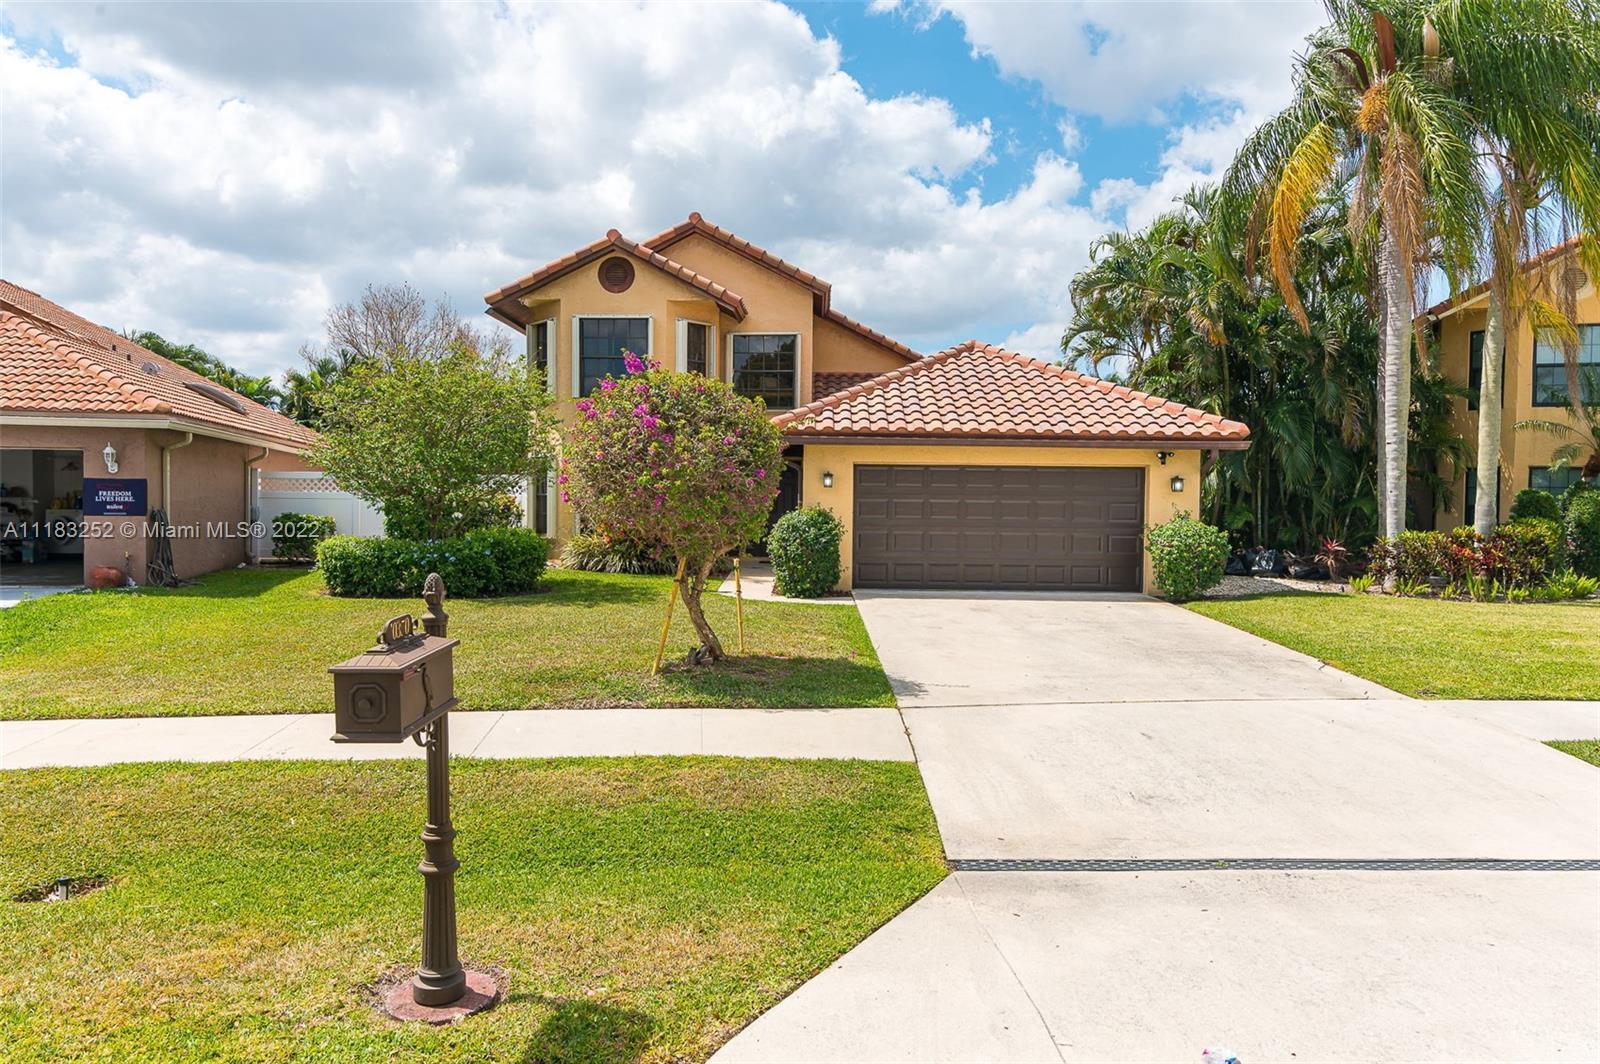 This immaculate 2 story home located in the beautiful Lakes of Boca Raton is ready for a loving fami